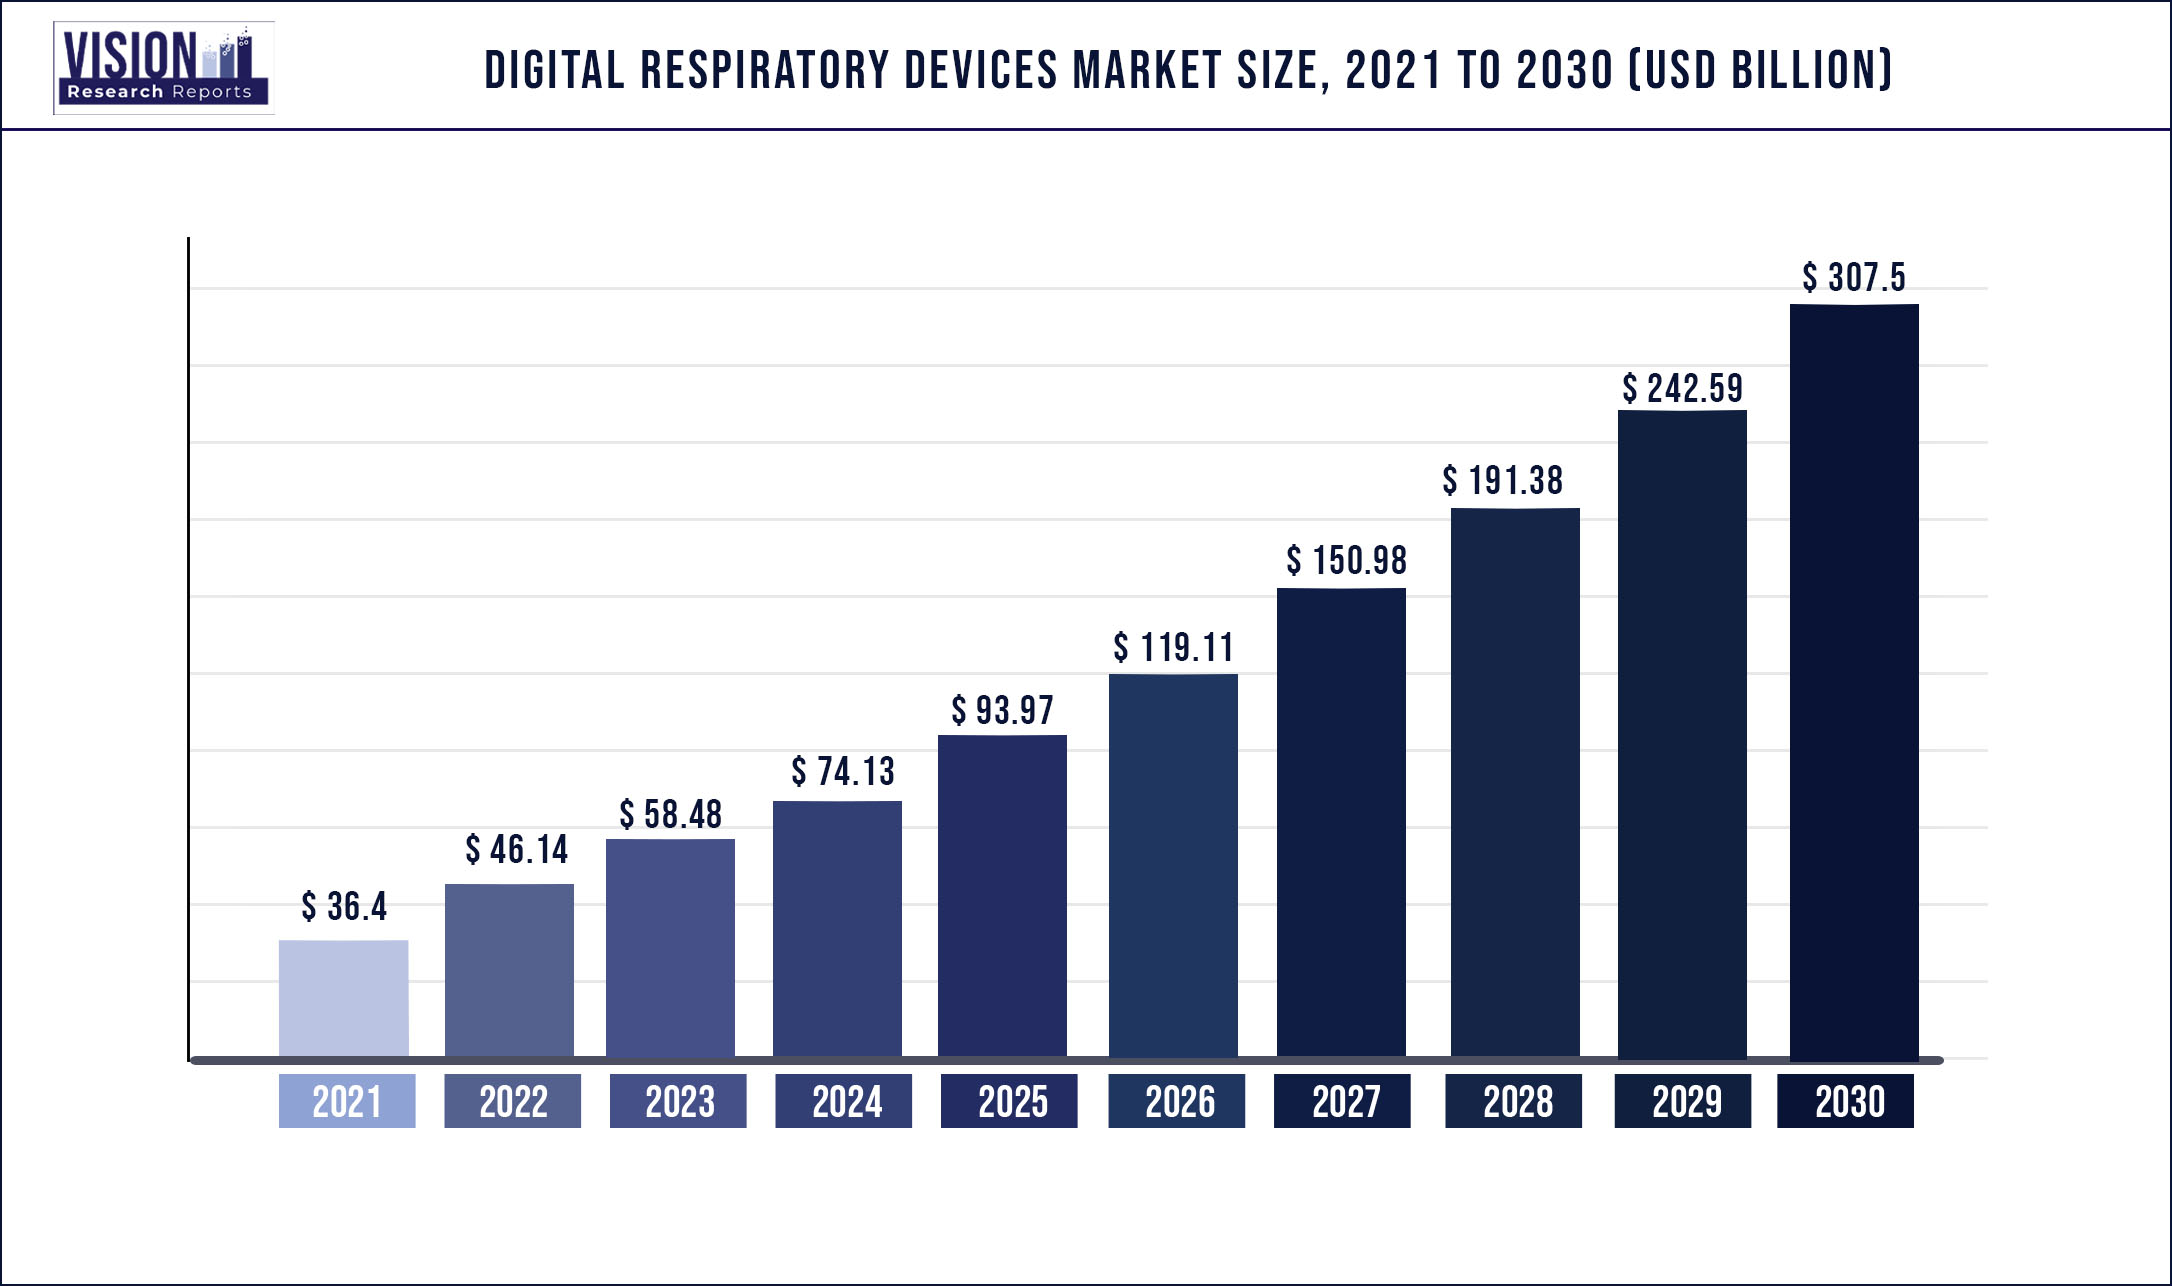 Digital Respiratory Devices Market Size 2021 to 2030